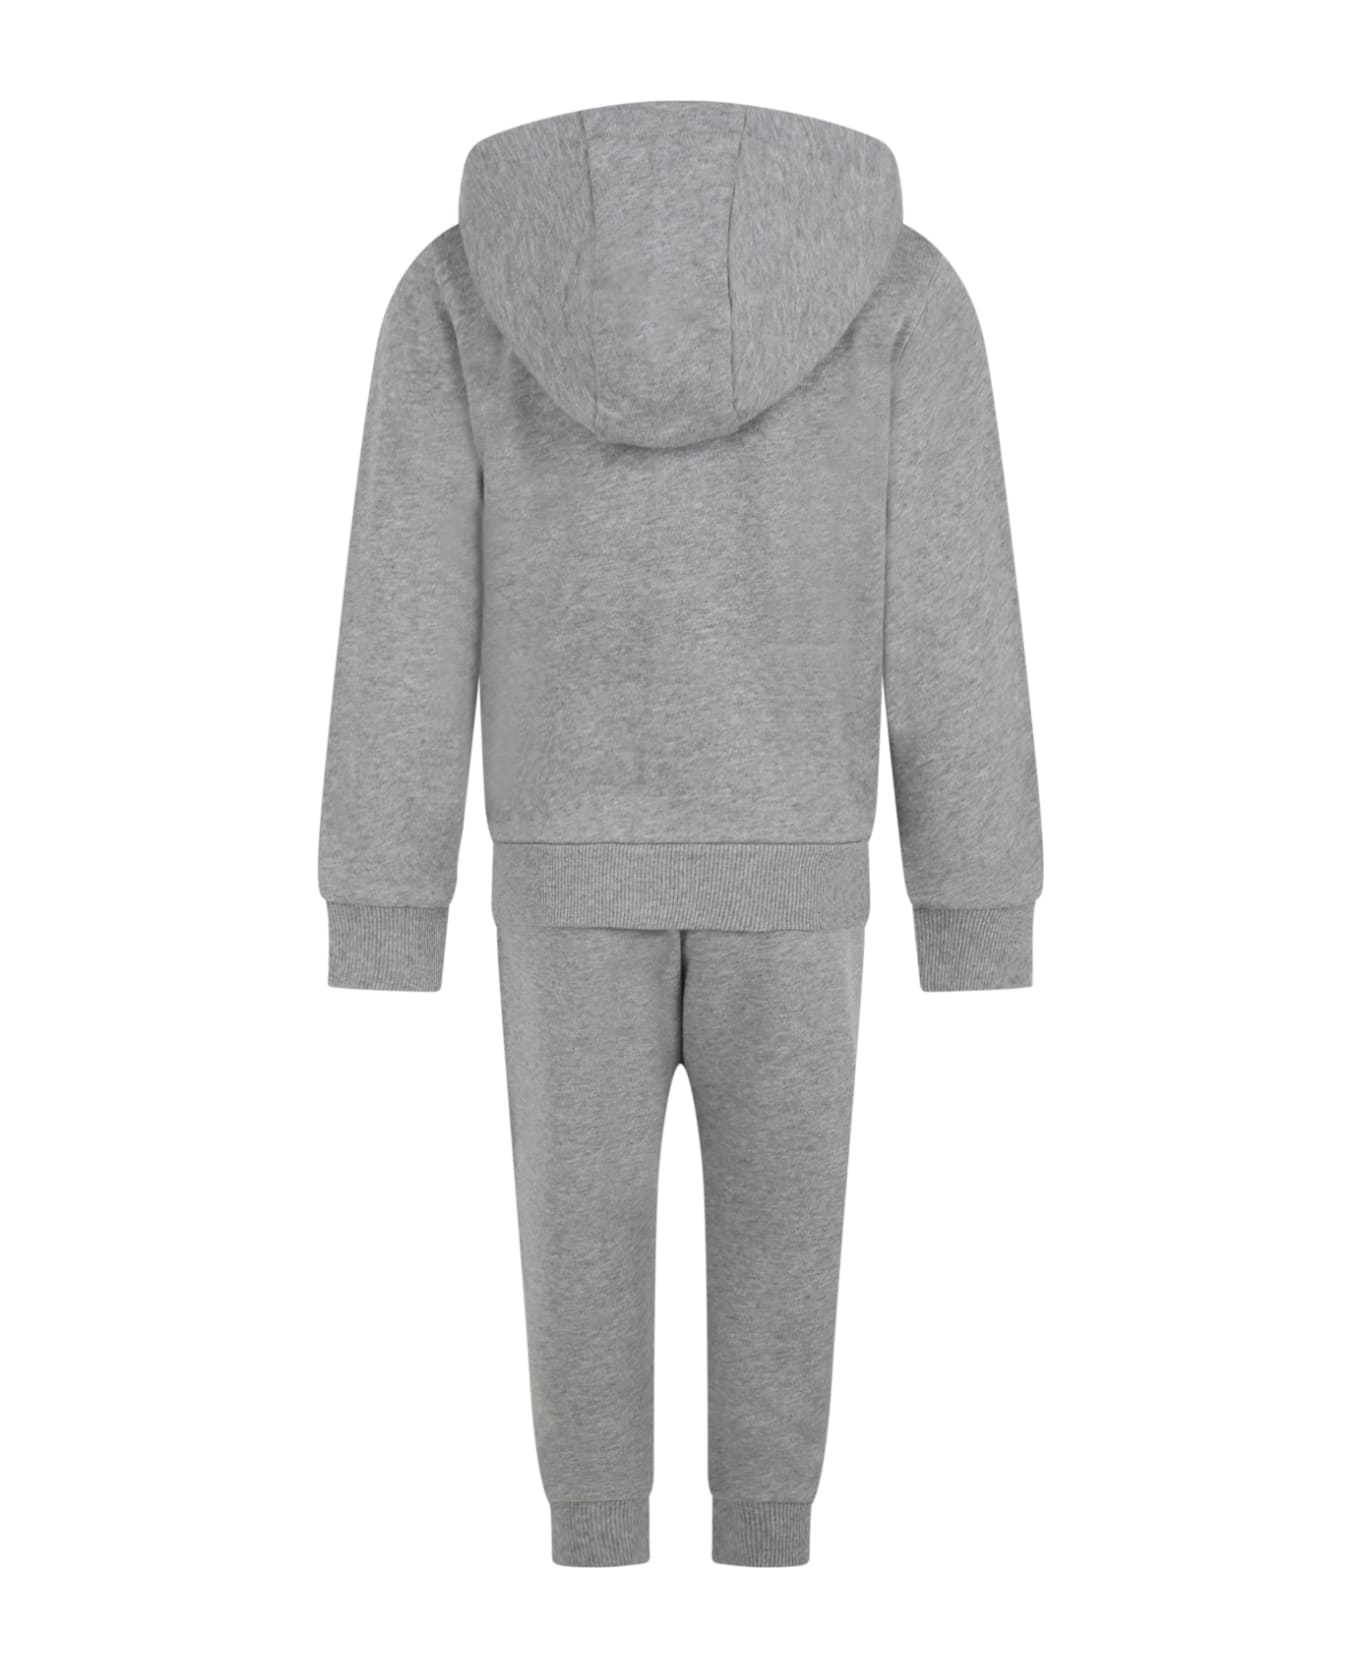 Moncler Grey Tracksuit For Boy With Iconic Patch - Blue